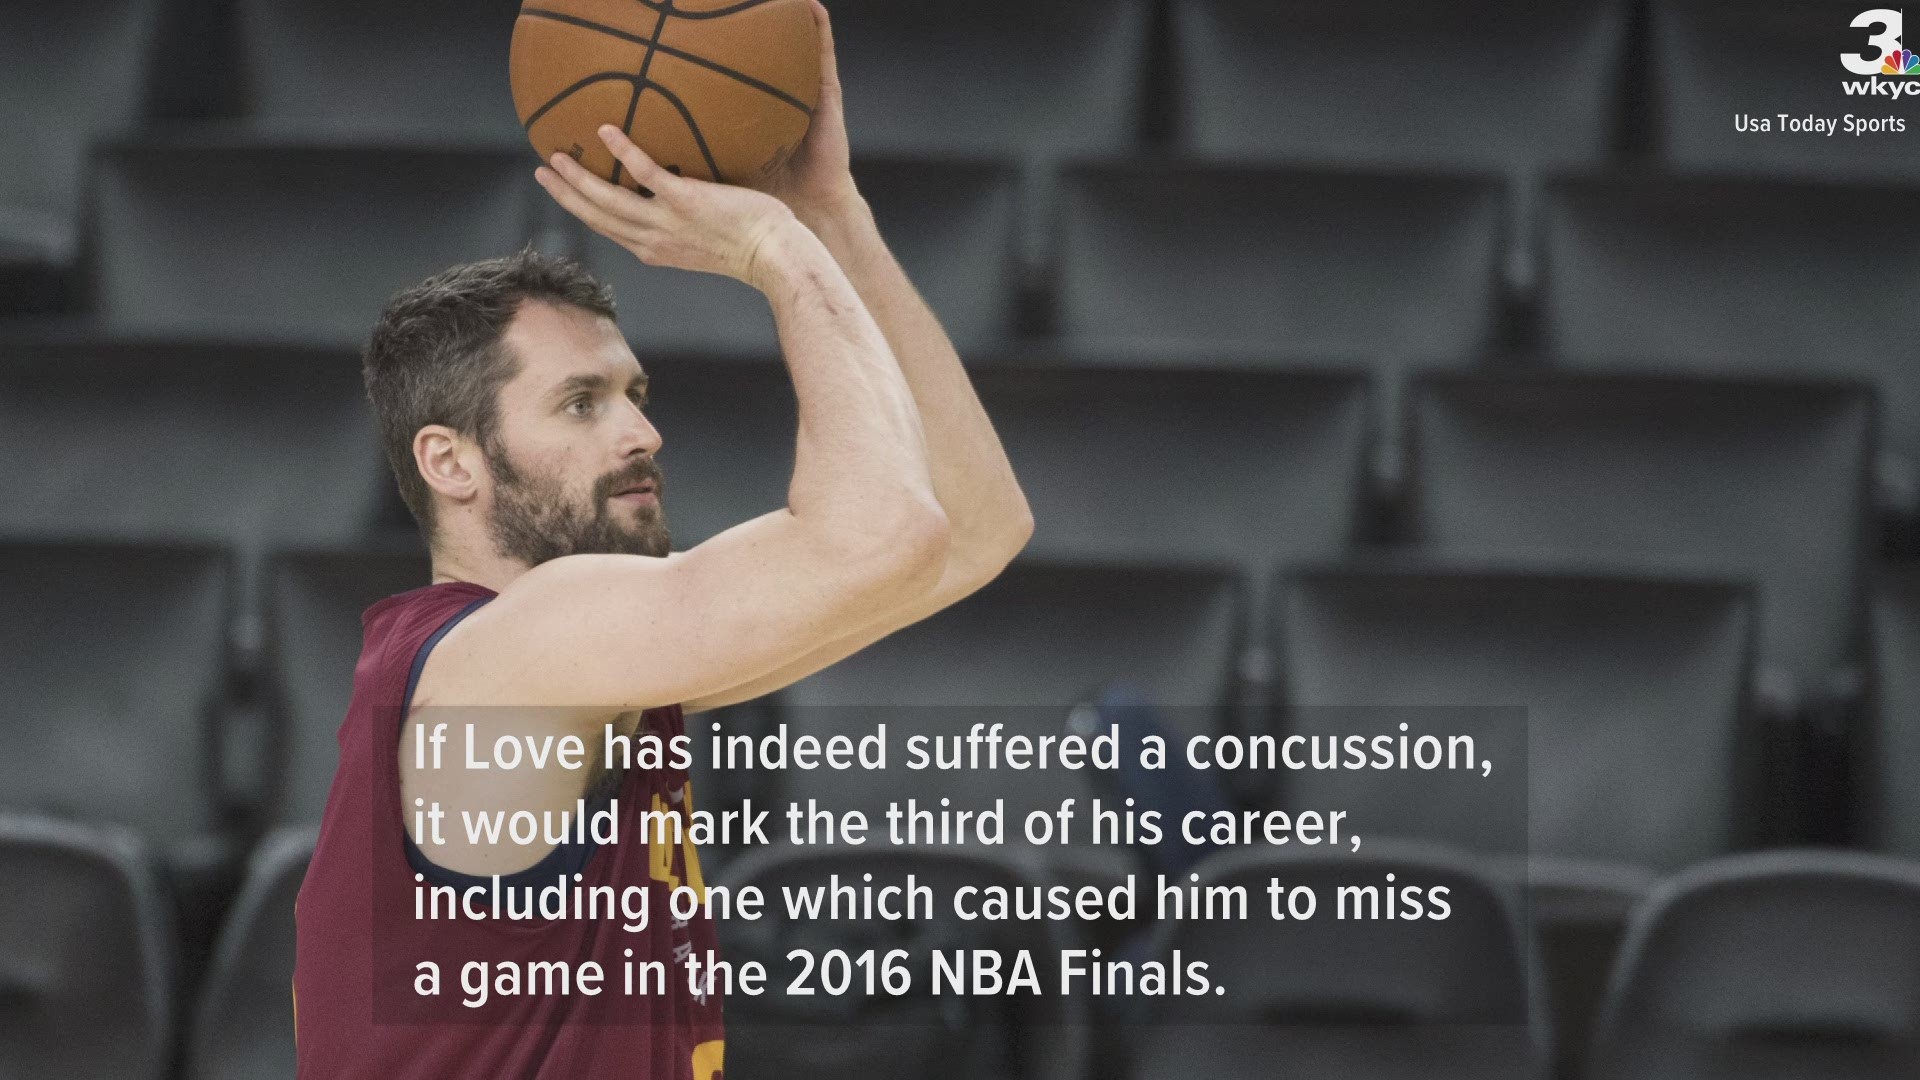 Cleveland Cavaliers center Kevin Love remains in concussion protocol before NBA Finals